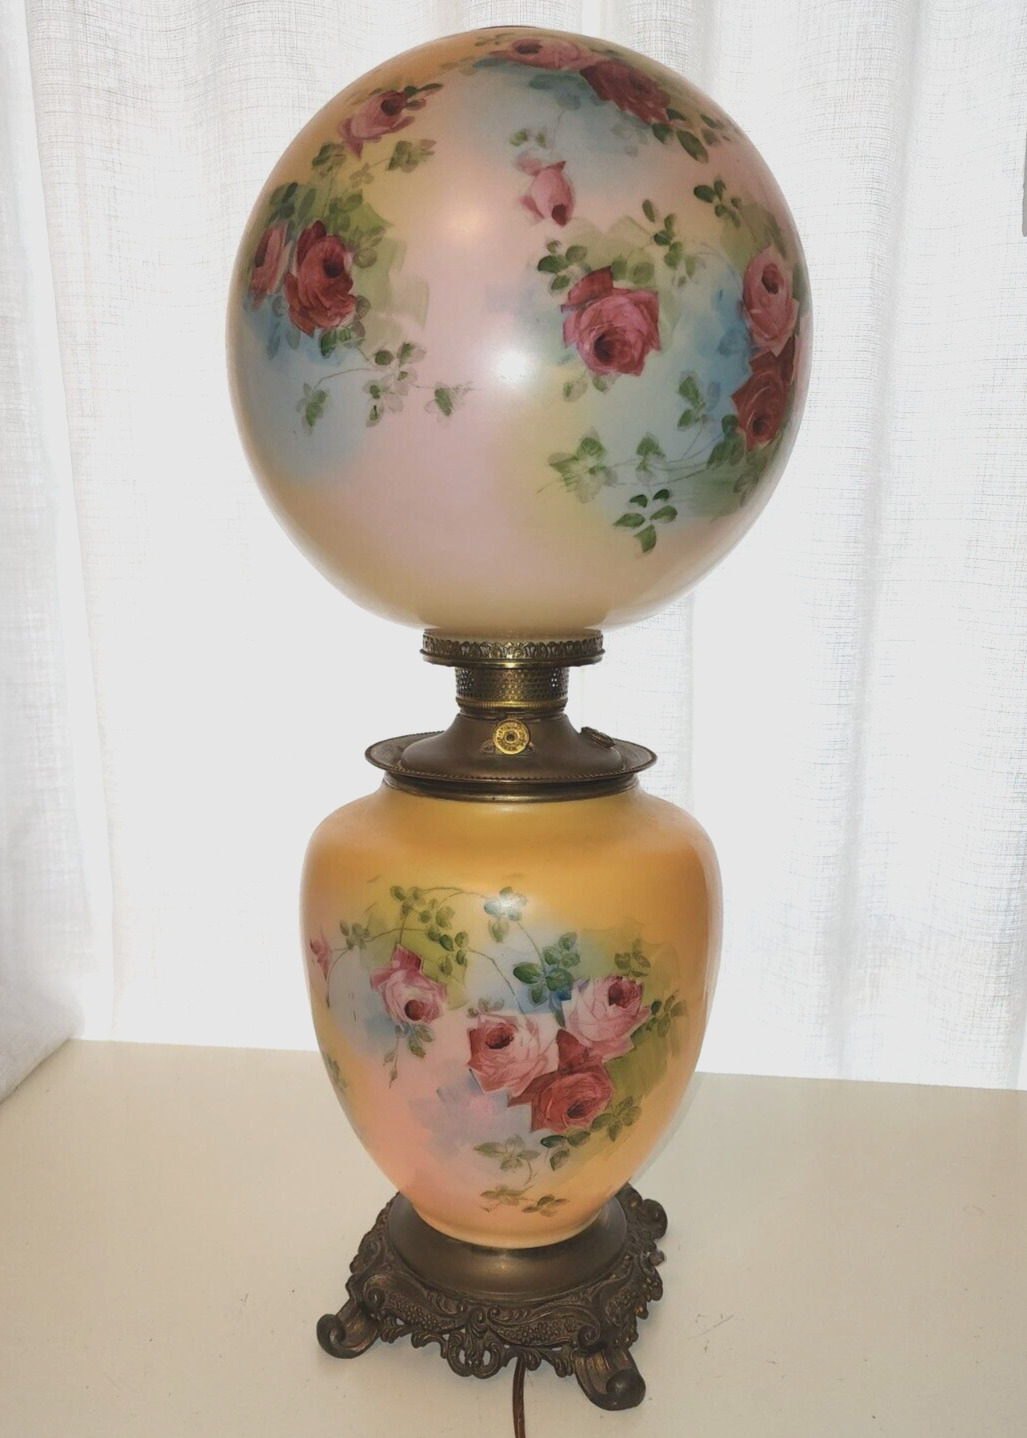 Antique Jumbo GWTW Converted Oil Banquet Lamp Rose/Floral, Top/Bottom Lights